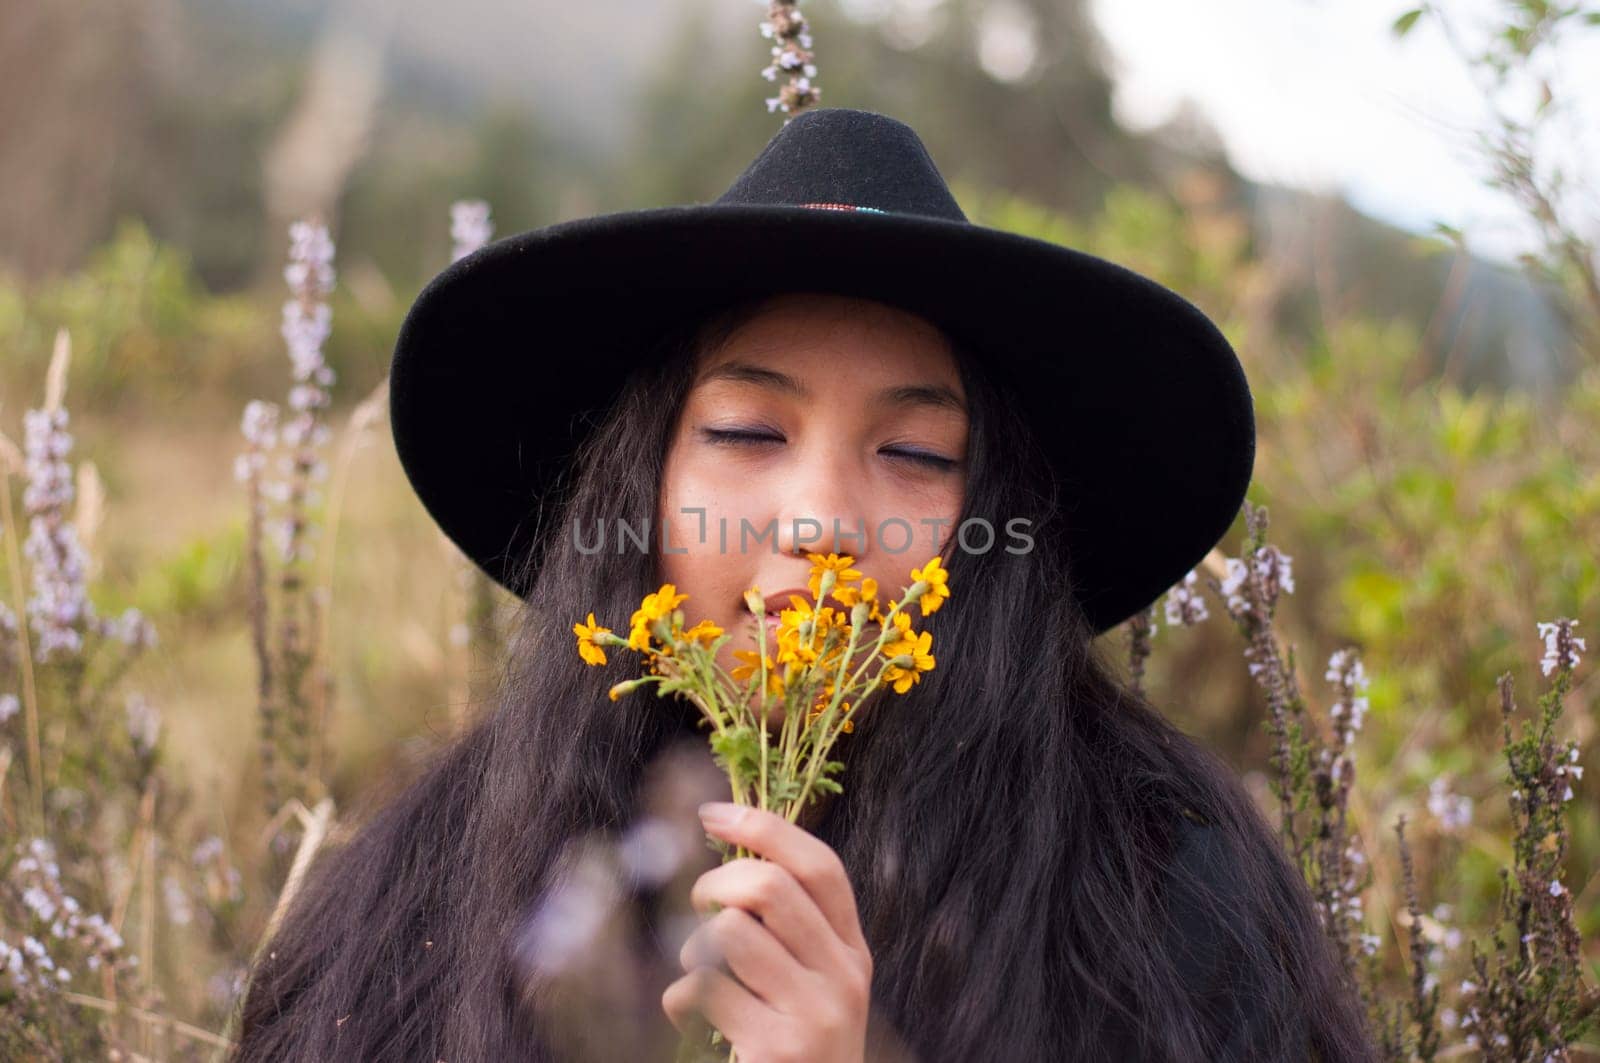 young woman in love smelling her lover's yellow flowers with her eyes closed surrounded by wildflowers. valentine days by Raulmartin